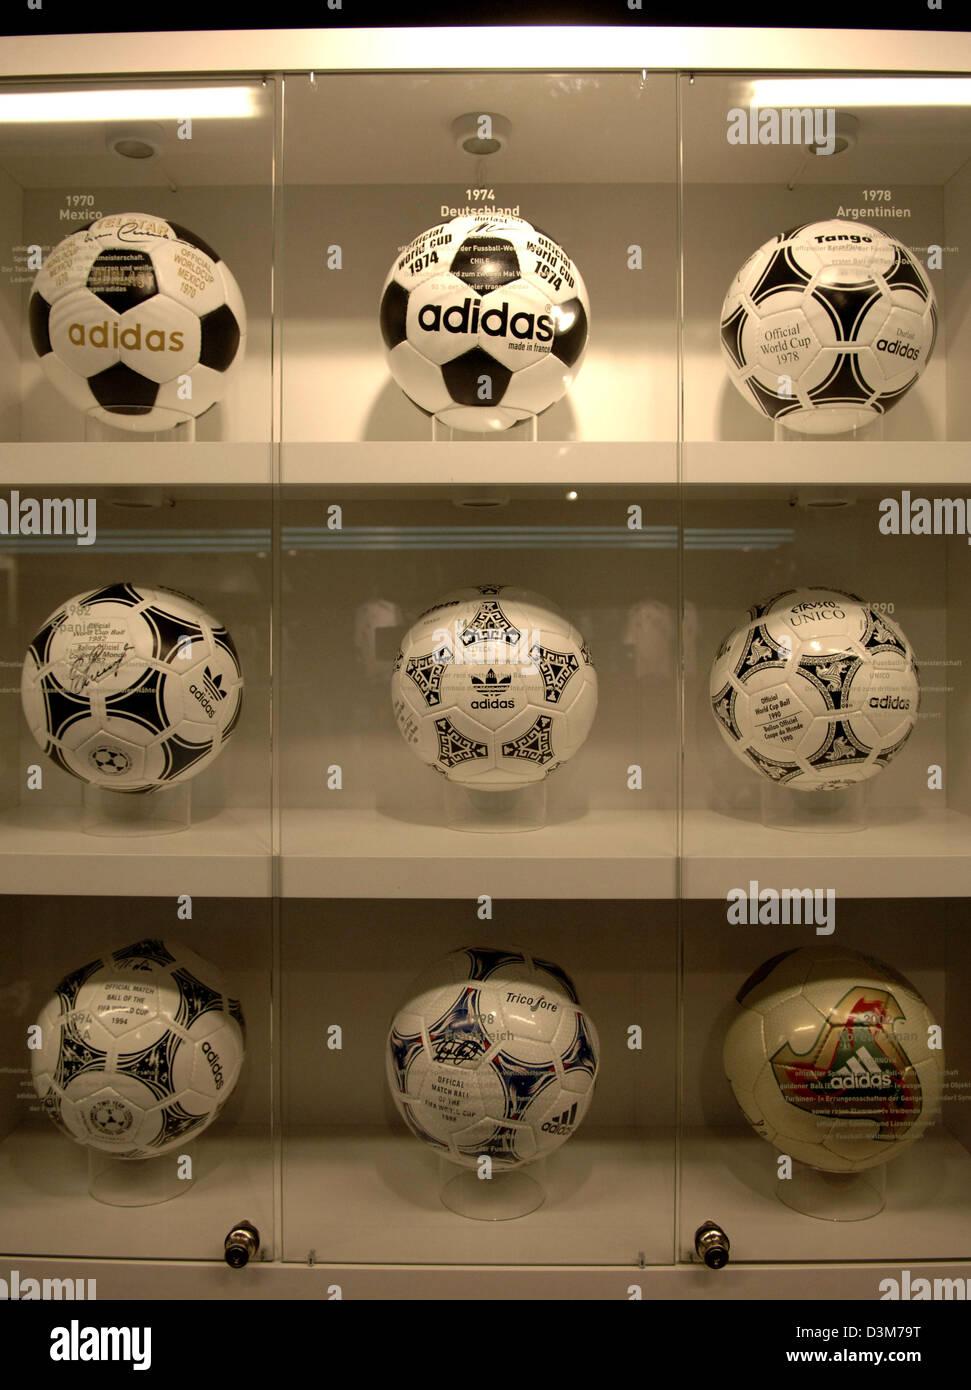 dpa) - All of the previous official World Cup soccer balls, which sporting  goods manufacturer adidas has produced, are on display in a showcase at the  Karstadt Game and Sports store in